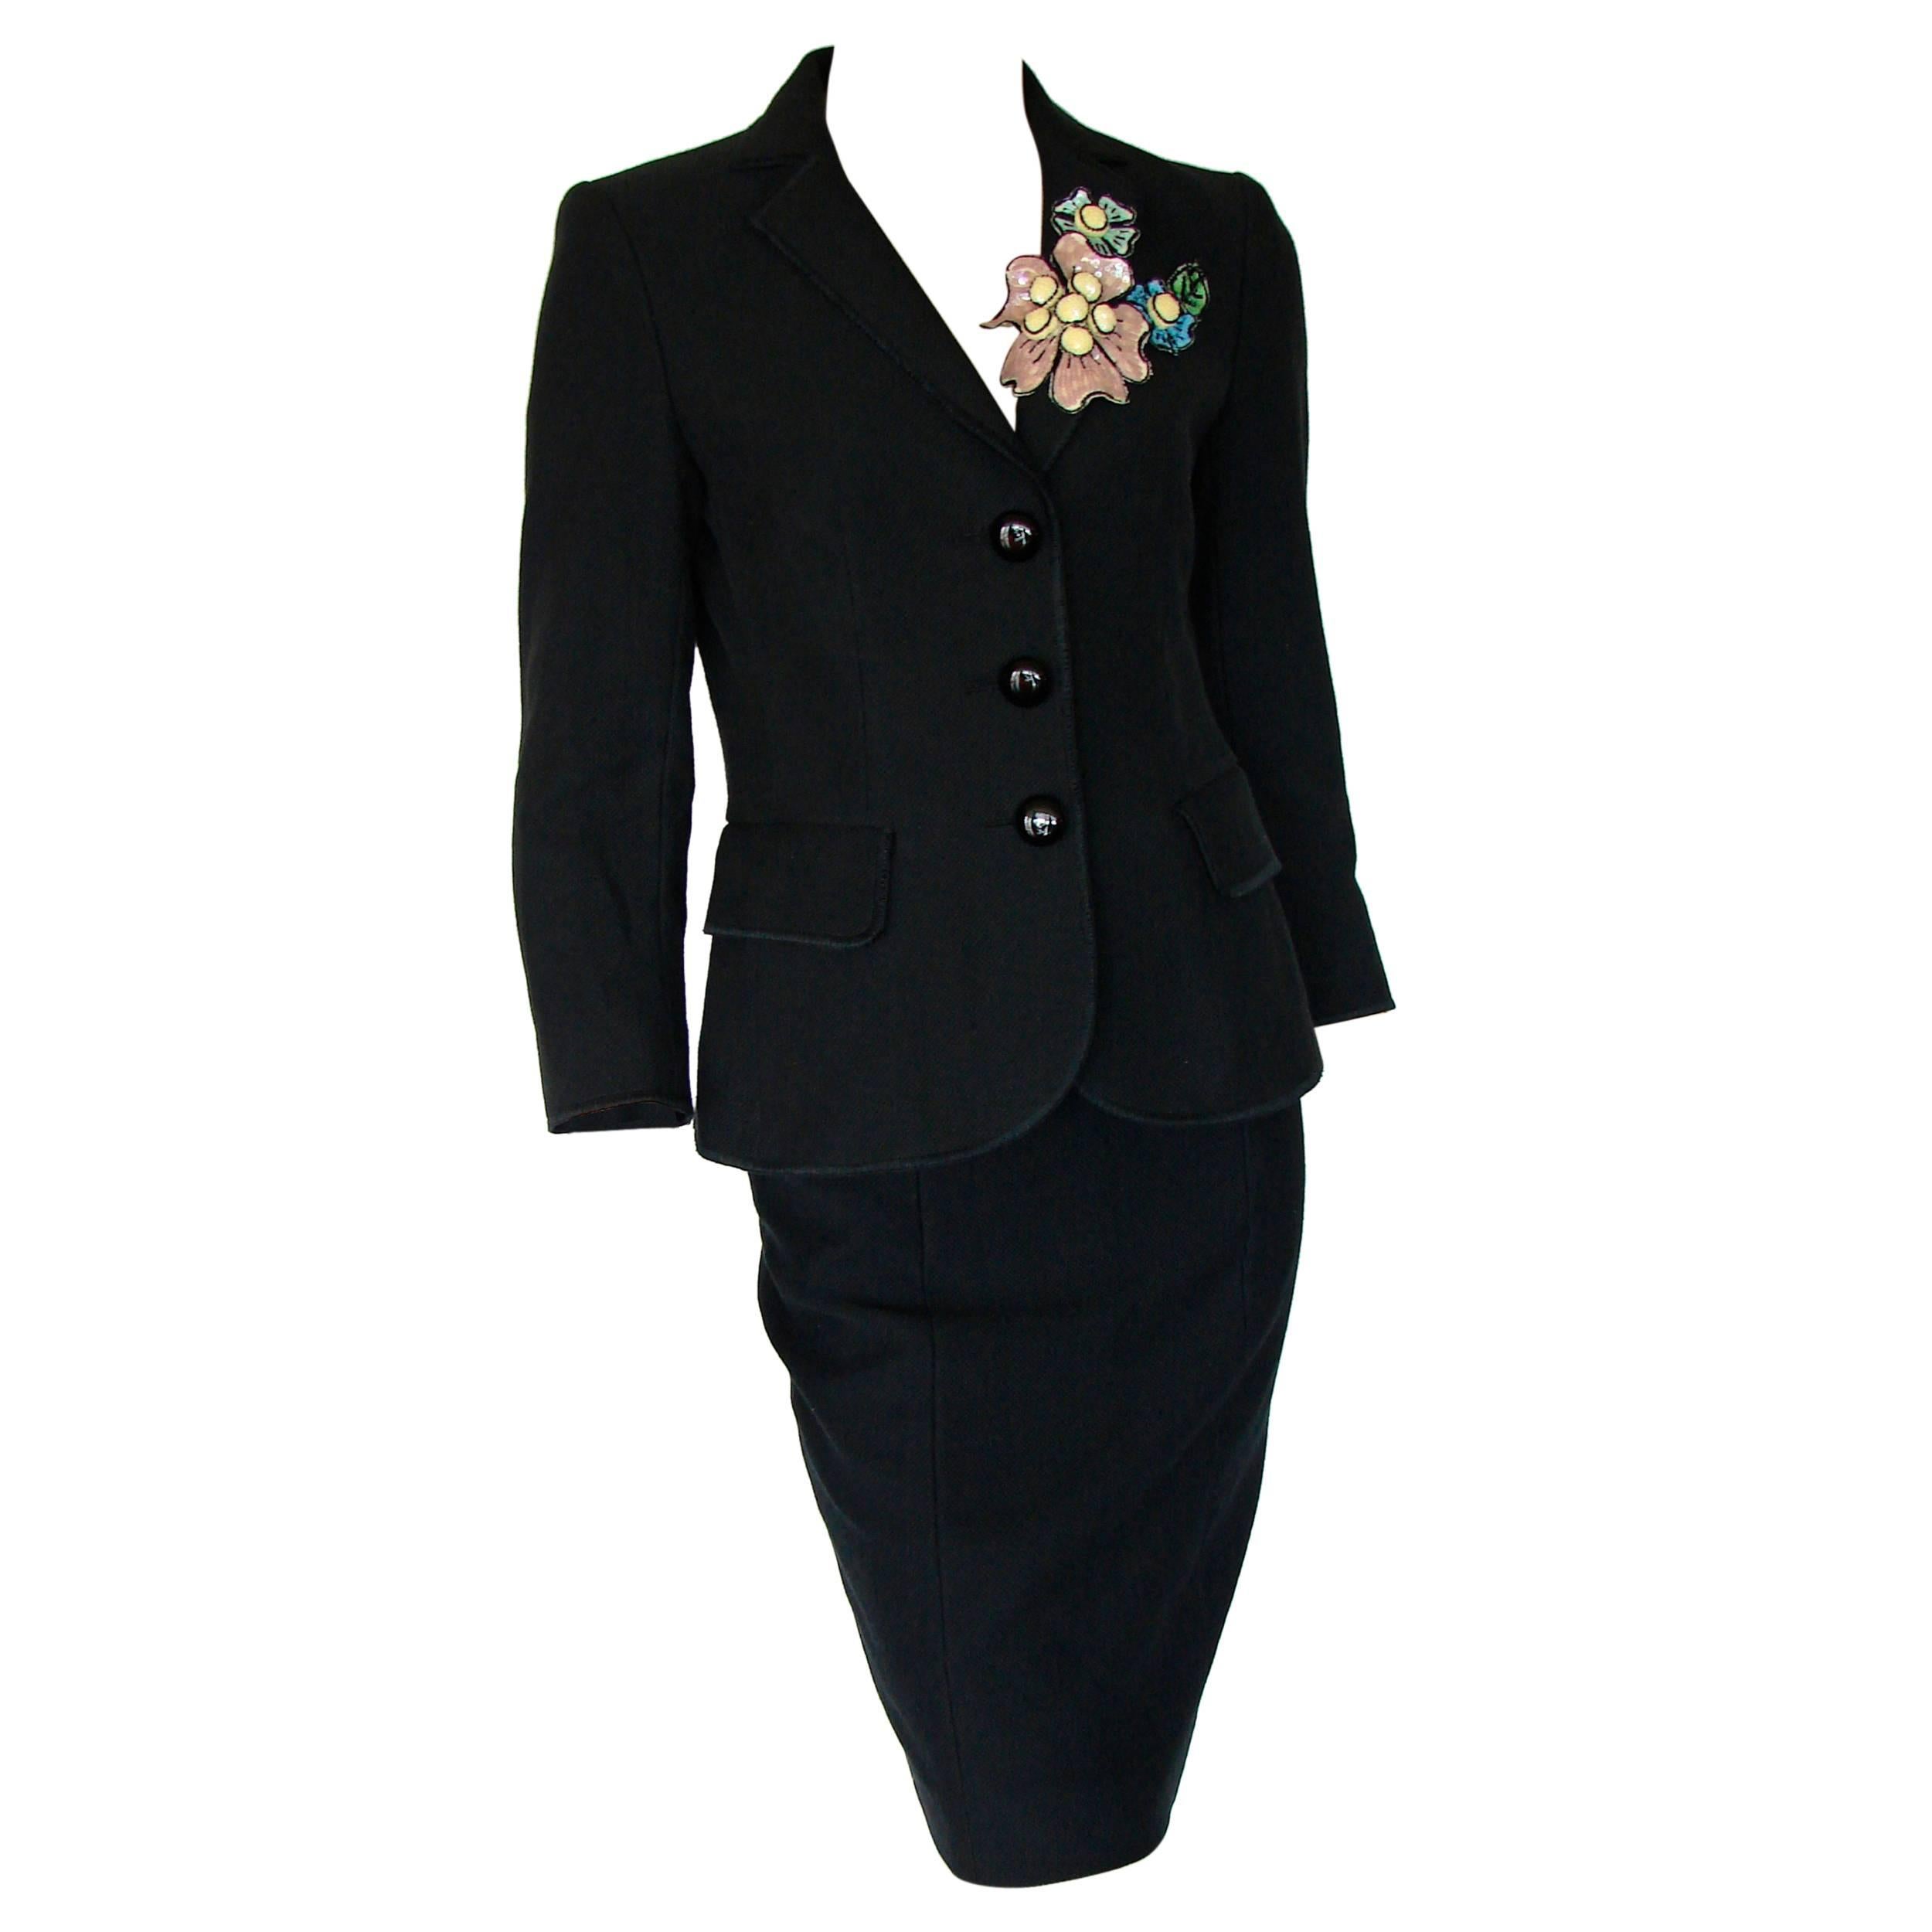 Moschino Cheap & Chic Black Jacket & Skirt Suit Sequin Corsage US Size 4/6